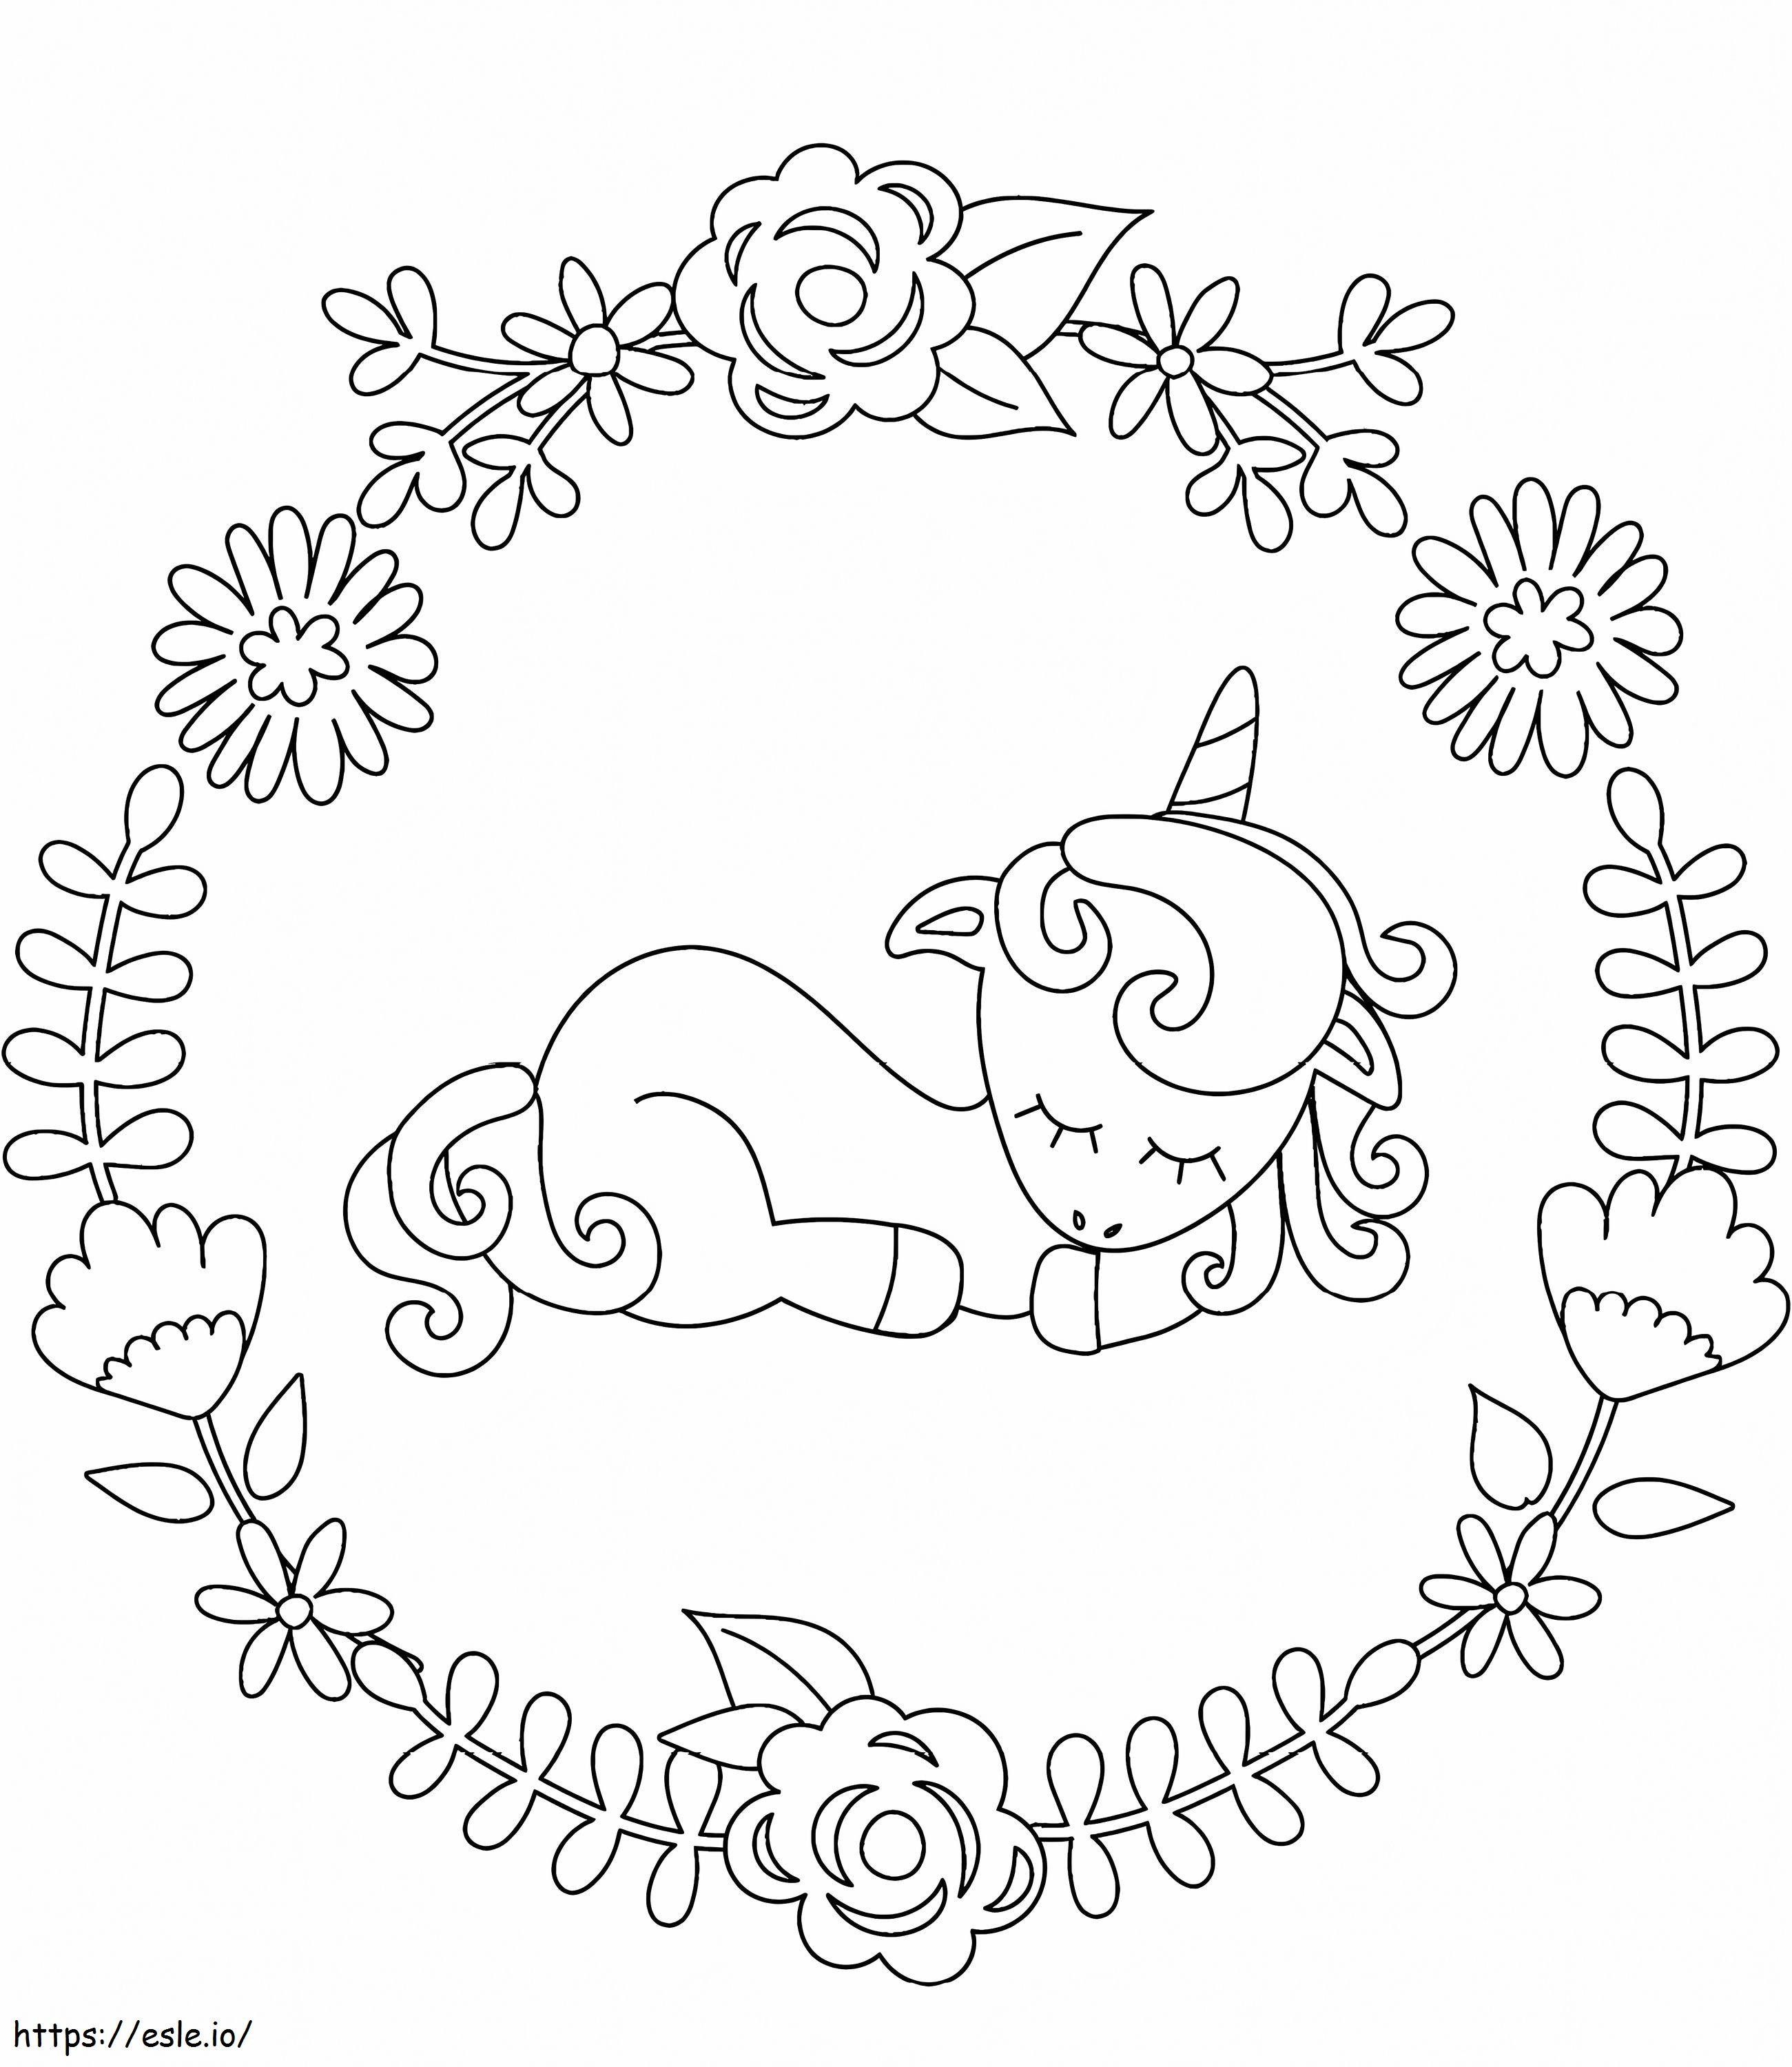 1564362009 Baby Unicorn Sleeping A4 coloring page